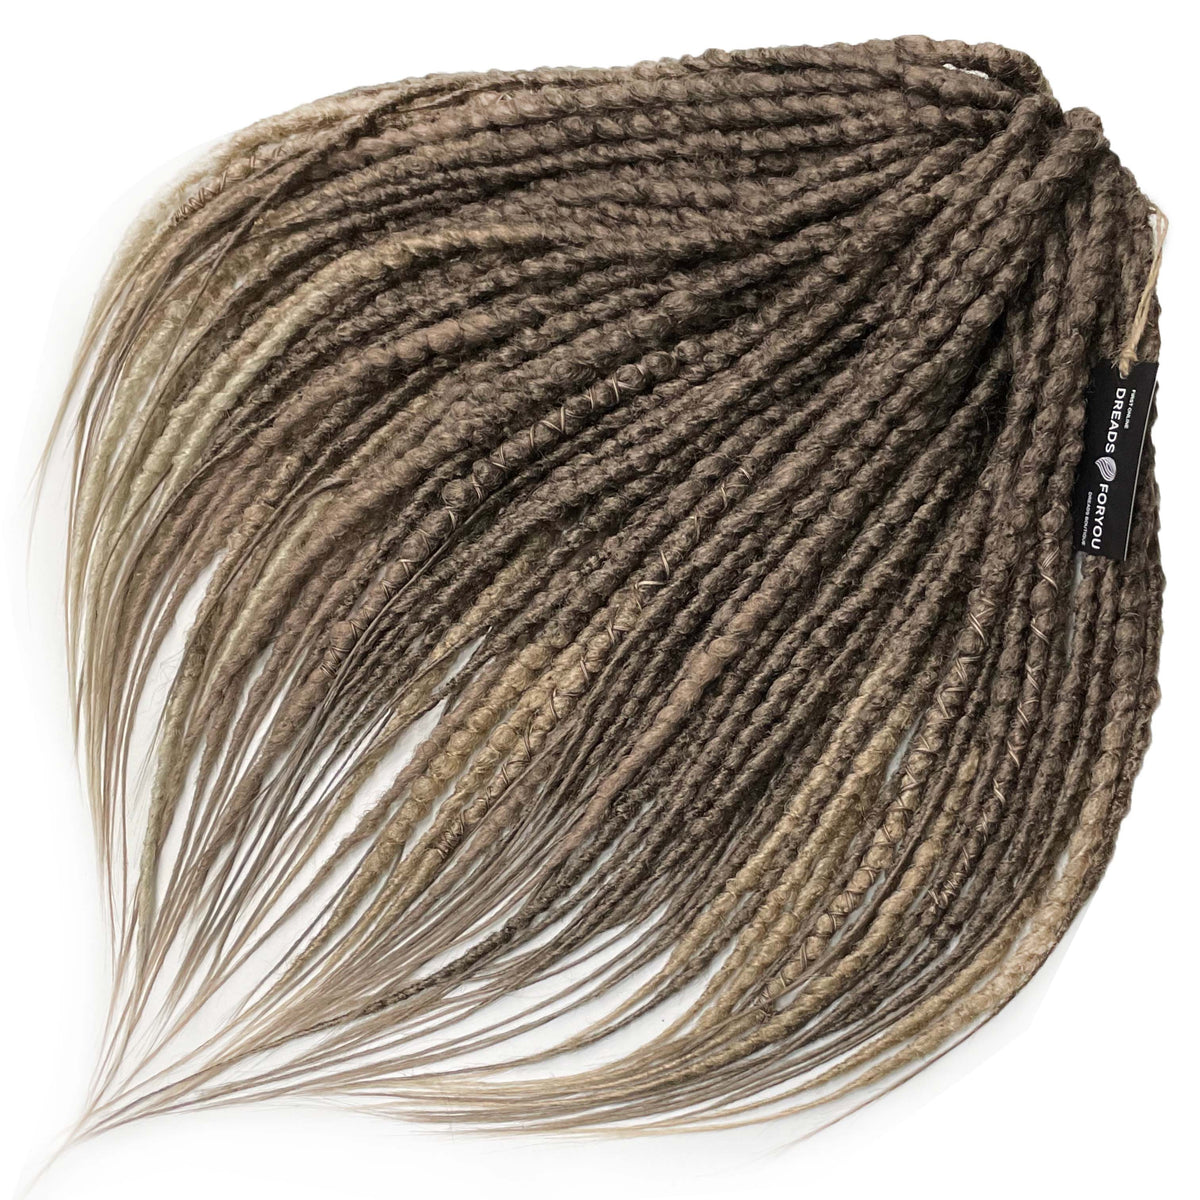 Textured Dreads LBROWN BOHO OMBRE